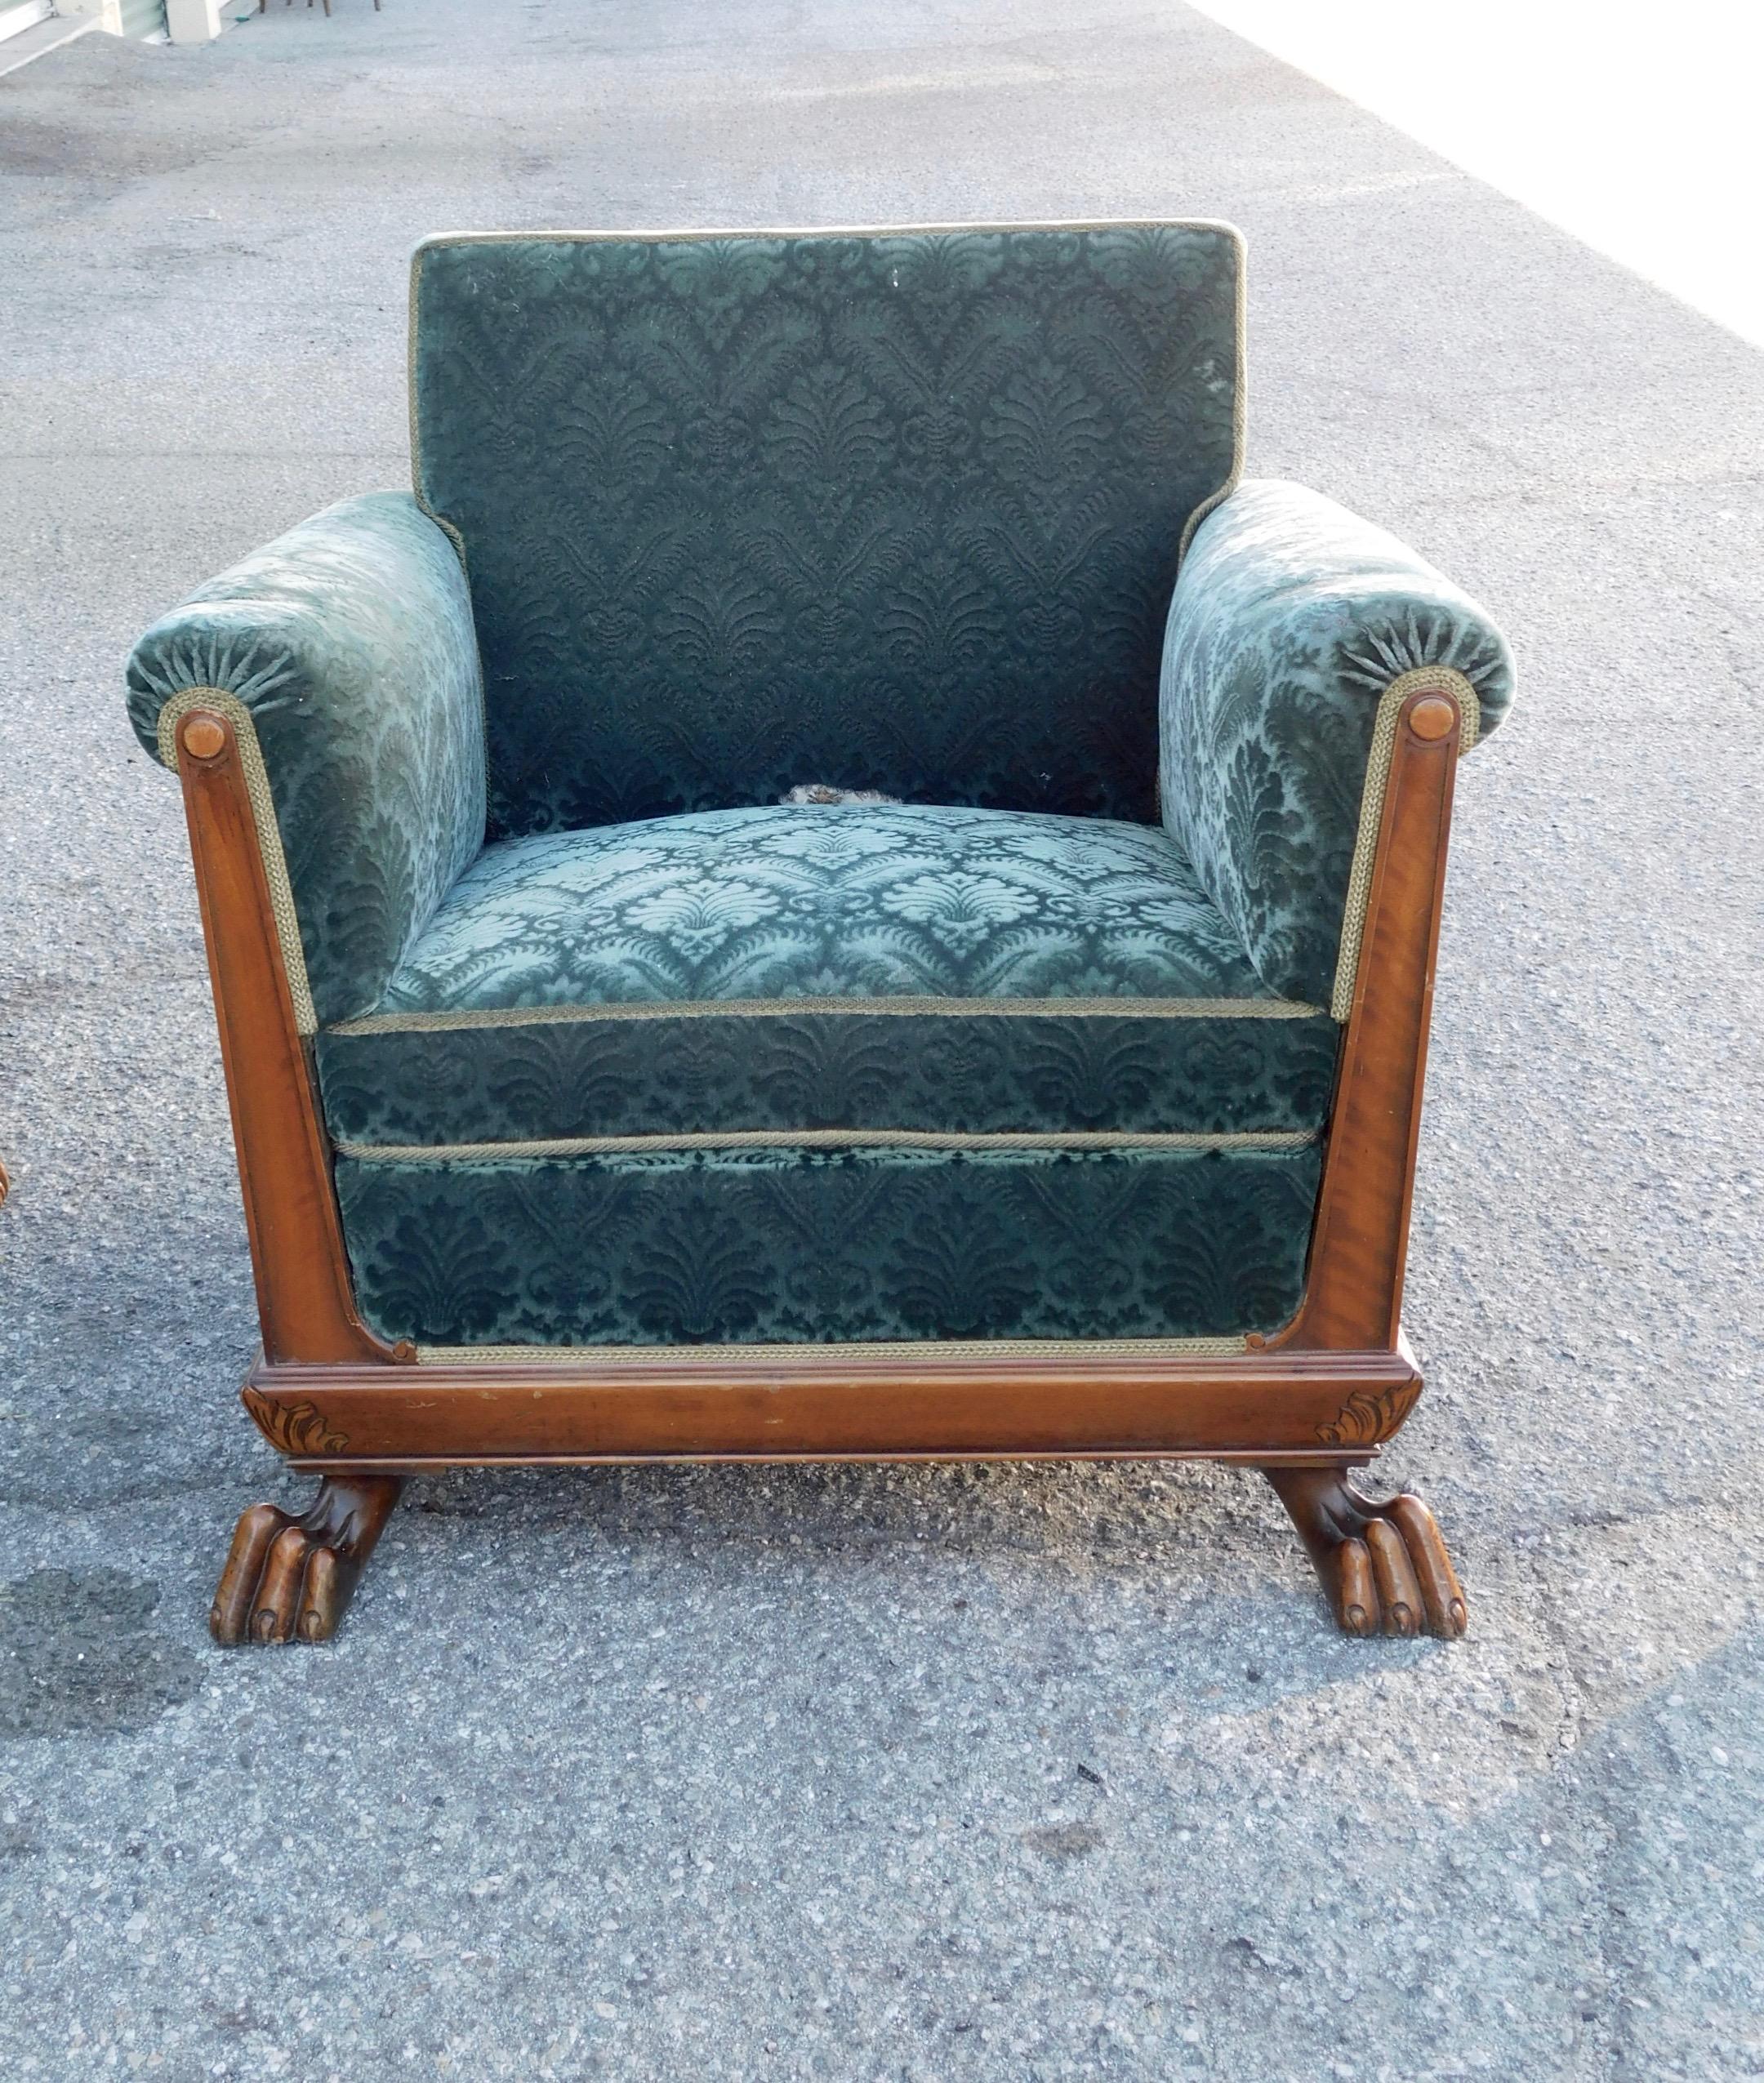 Swedish Art Deco Cubic Club Chairs with Claw Feet by Eugen Höglund, circa 1930 For Sale 2